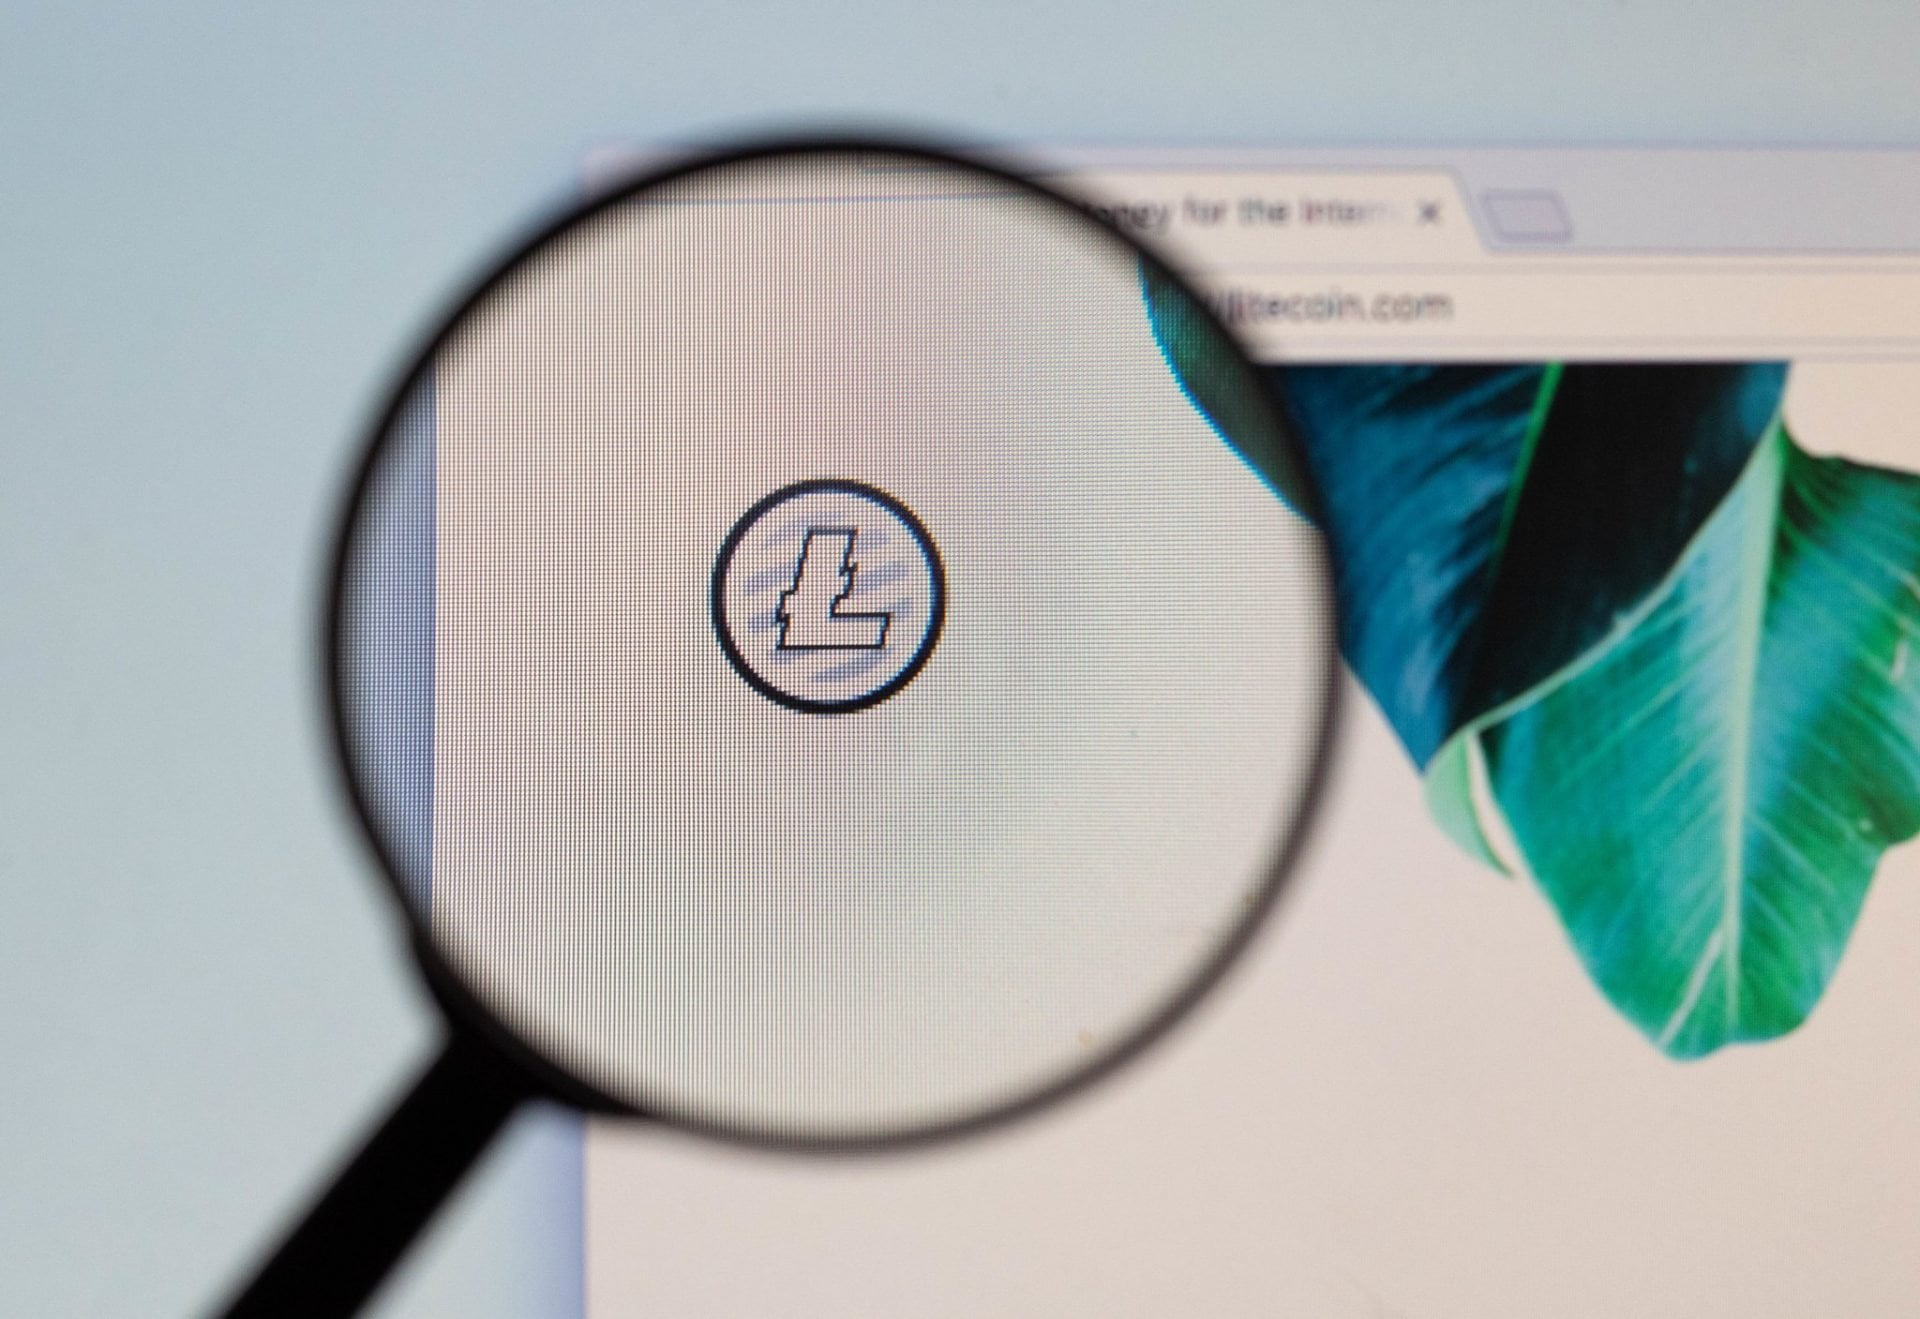 Litecoin Foundation Board Reassures Crypto Community After "FUD" 15